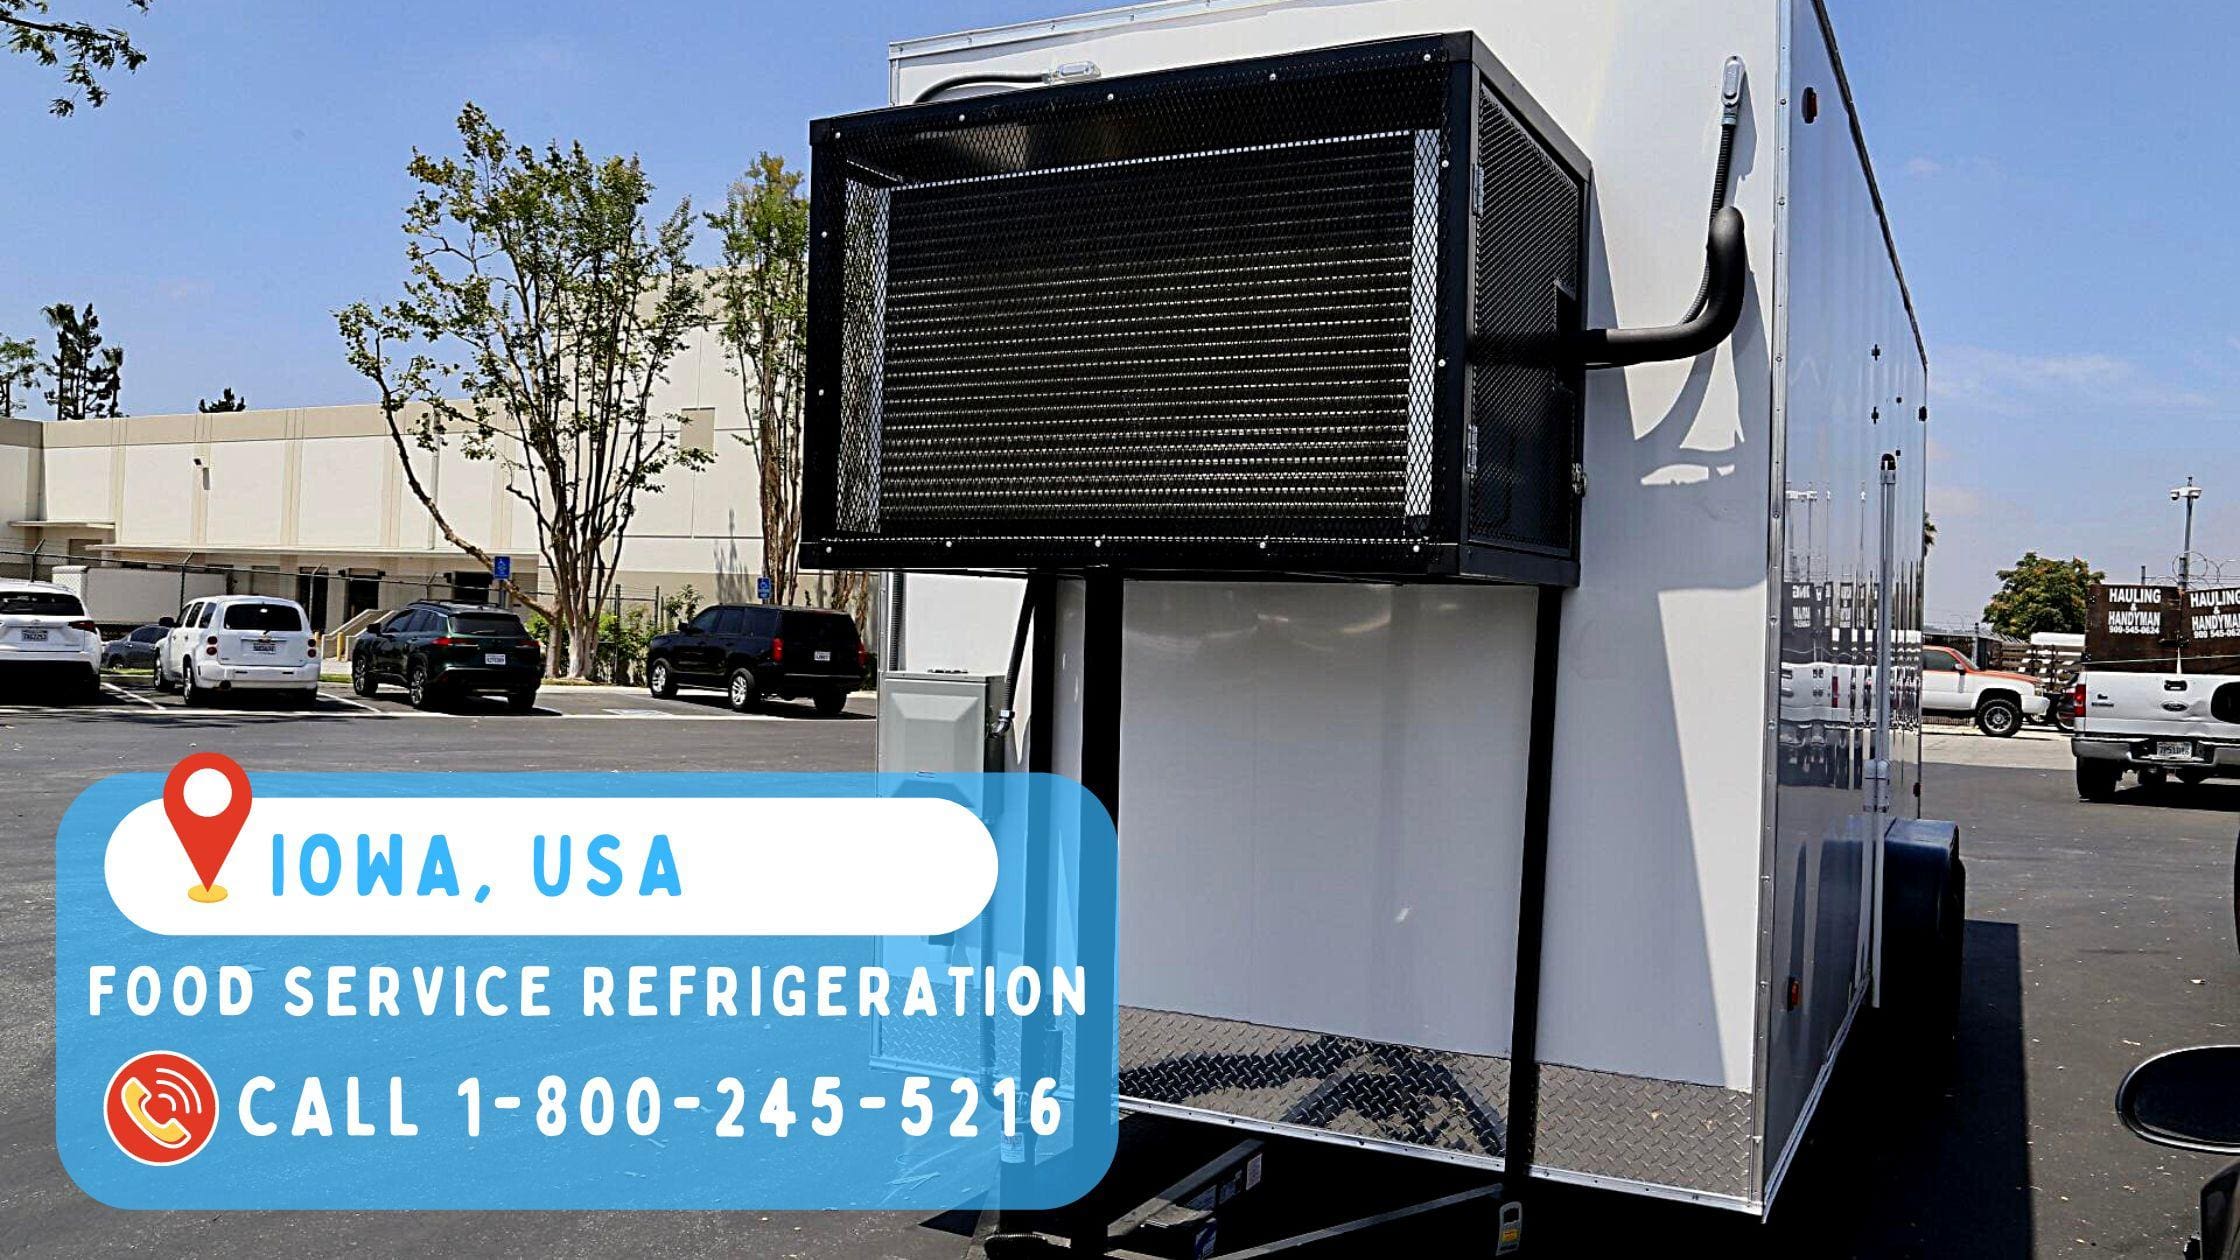 Food Service Refrigeration in the State of Iowa